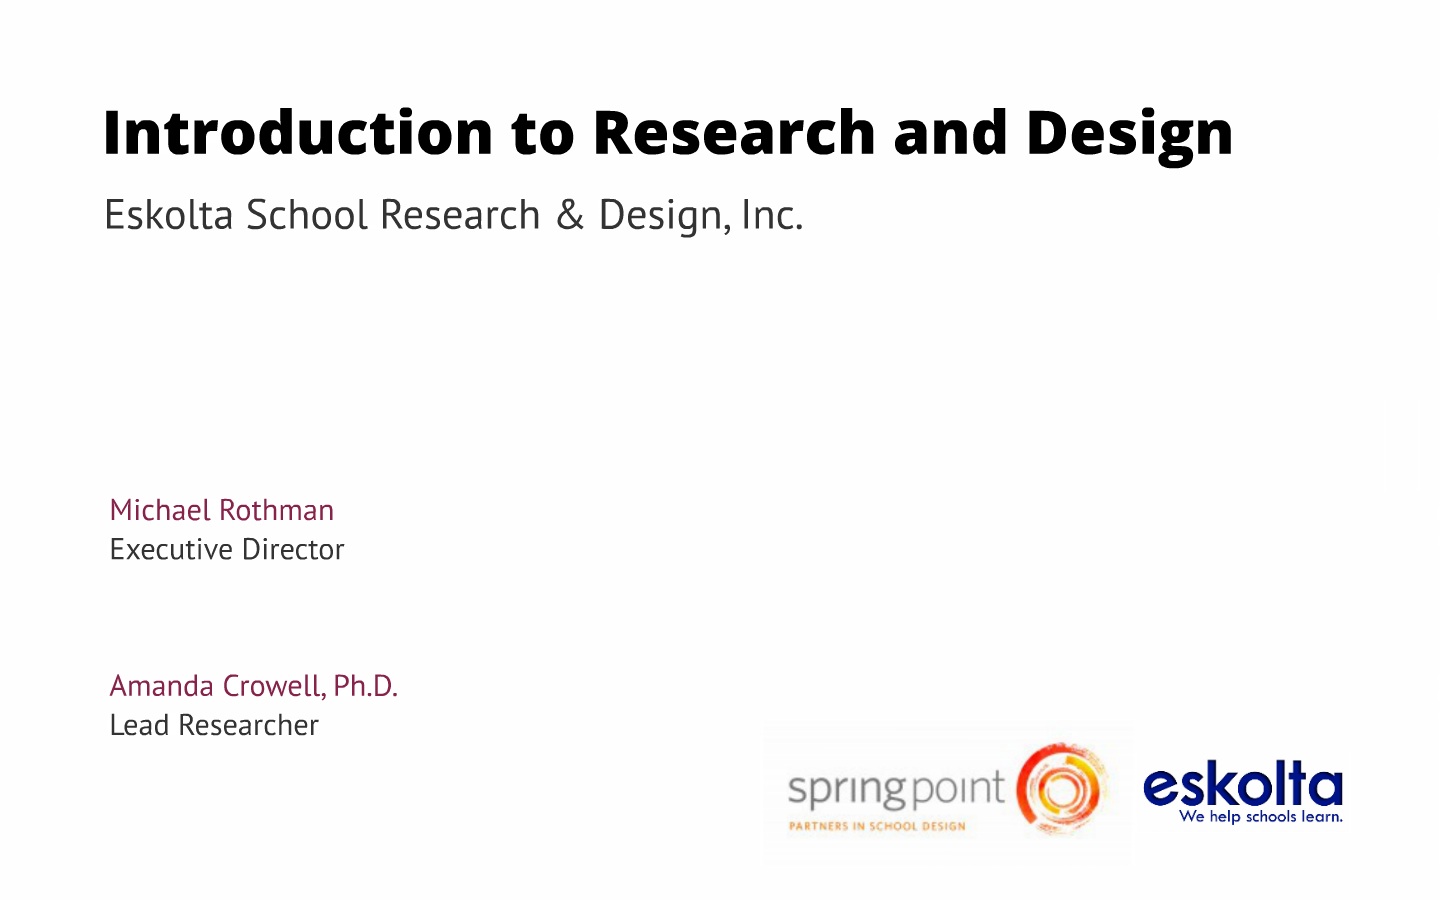 Springpoint Partners in School Design: Using Research for Effective School Design